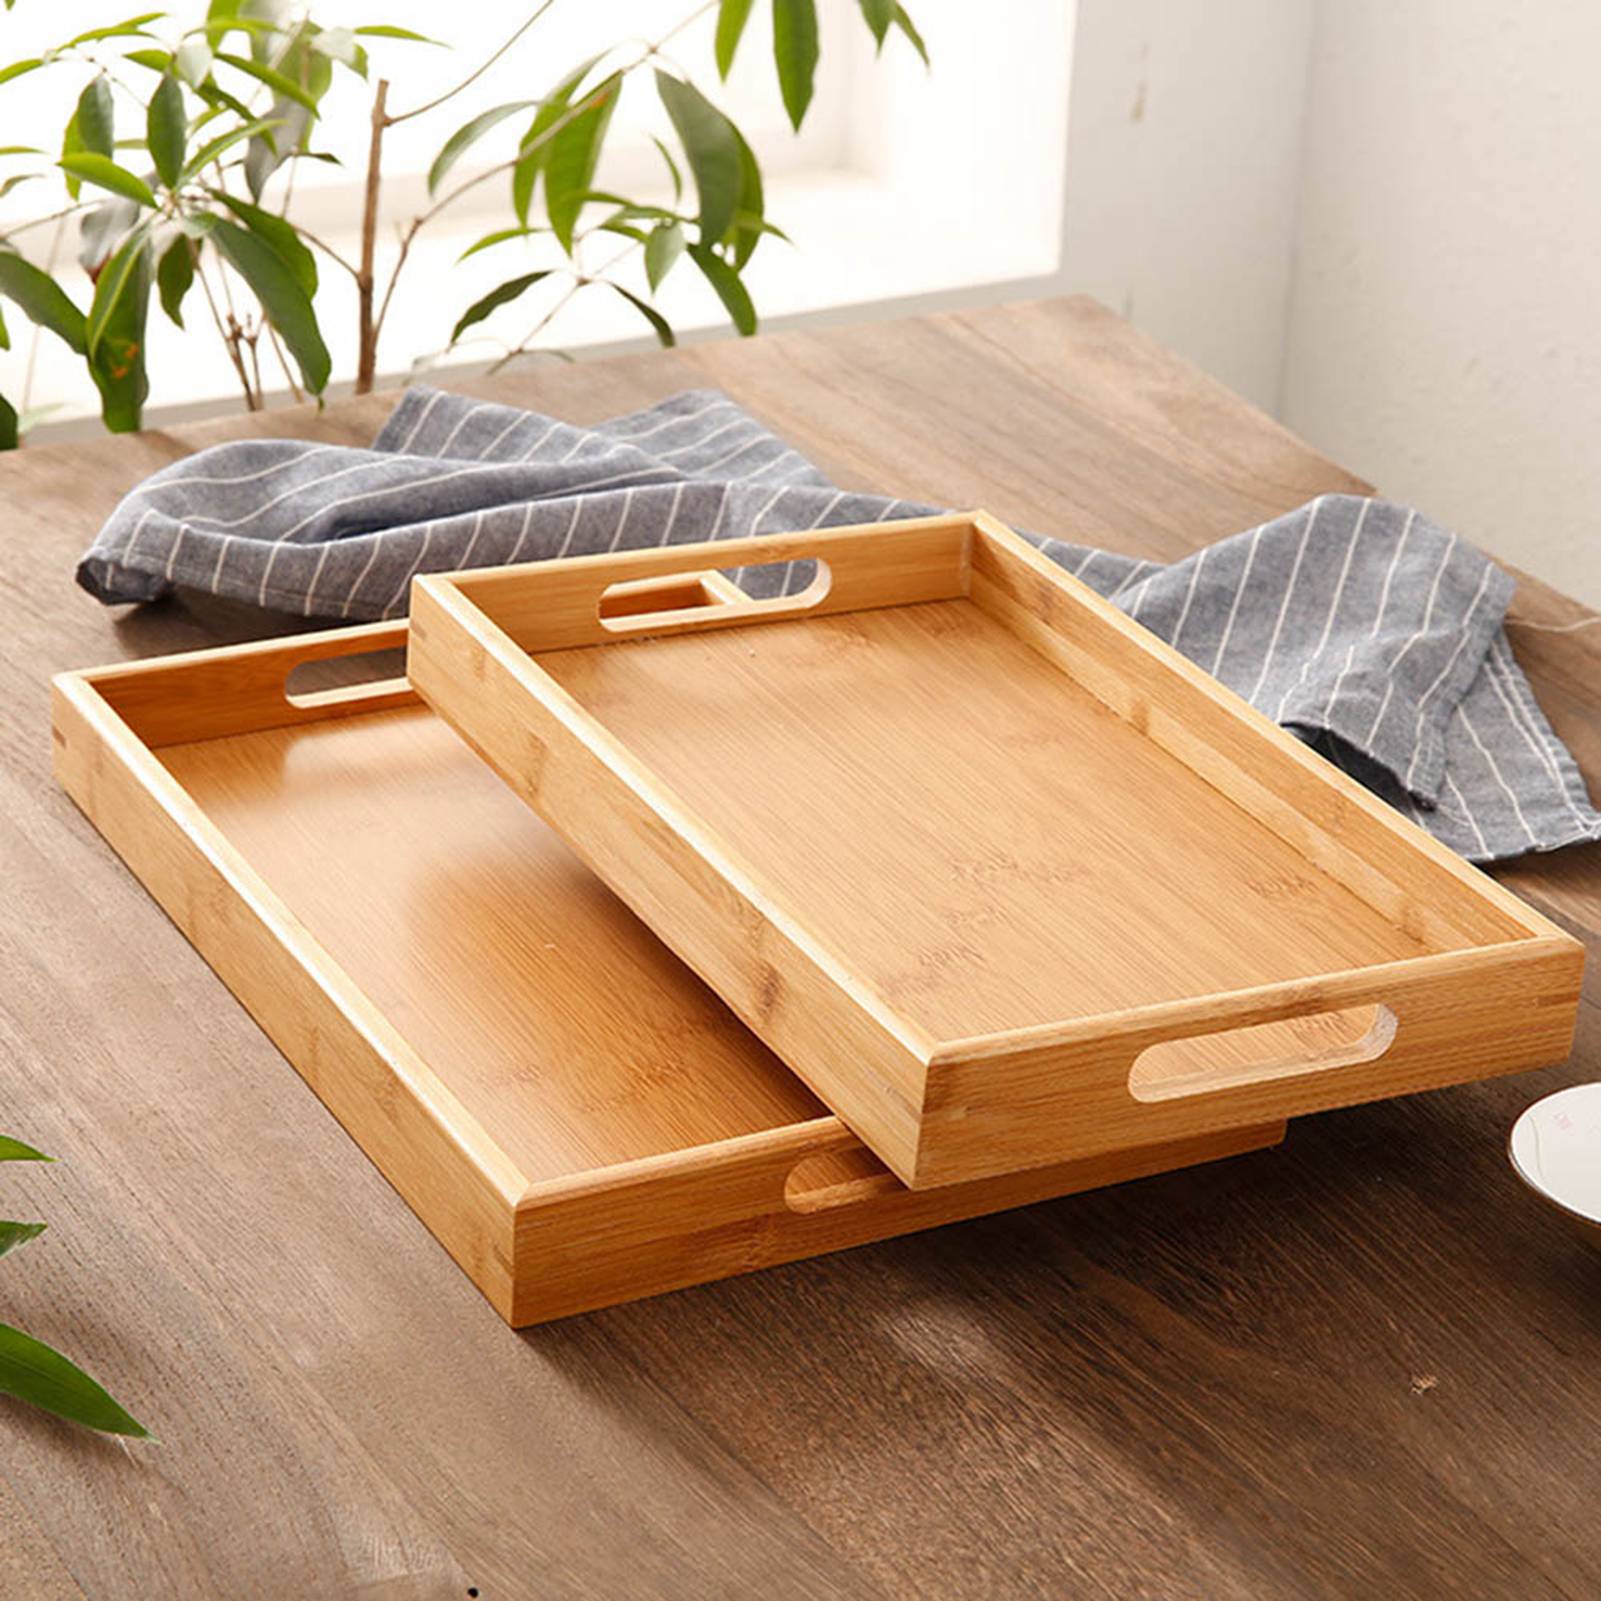 Wooden Serving Tray With Handles Food Wood Table Bamboo Trays Large Rectangular 